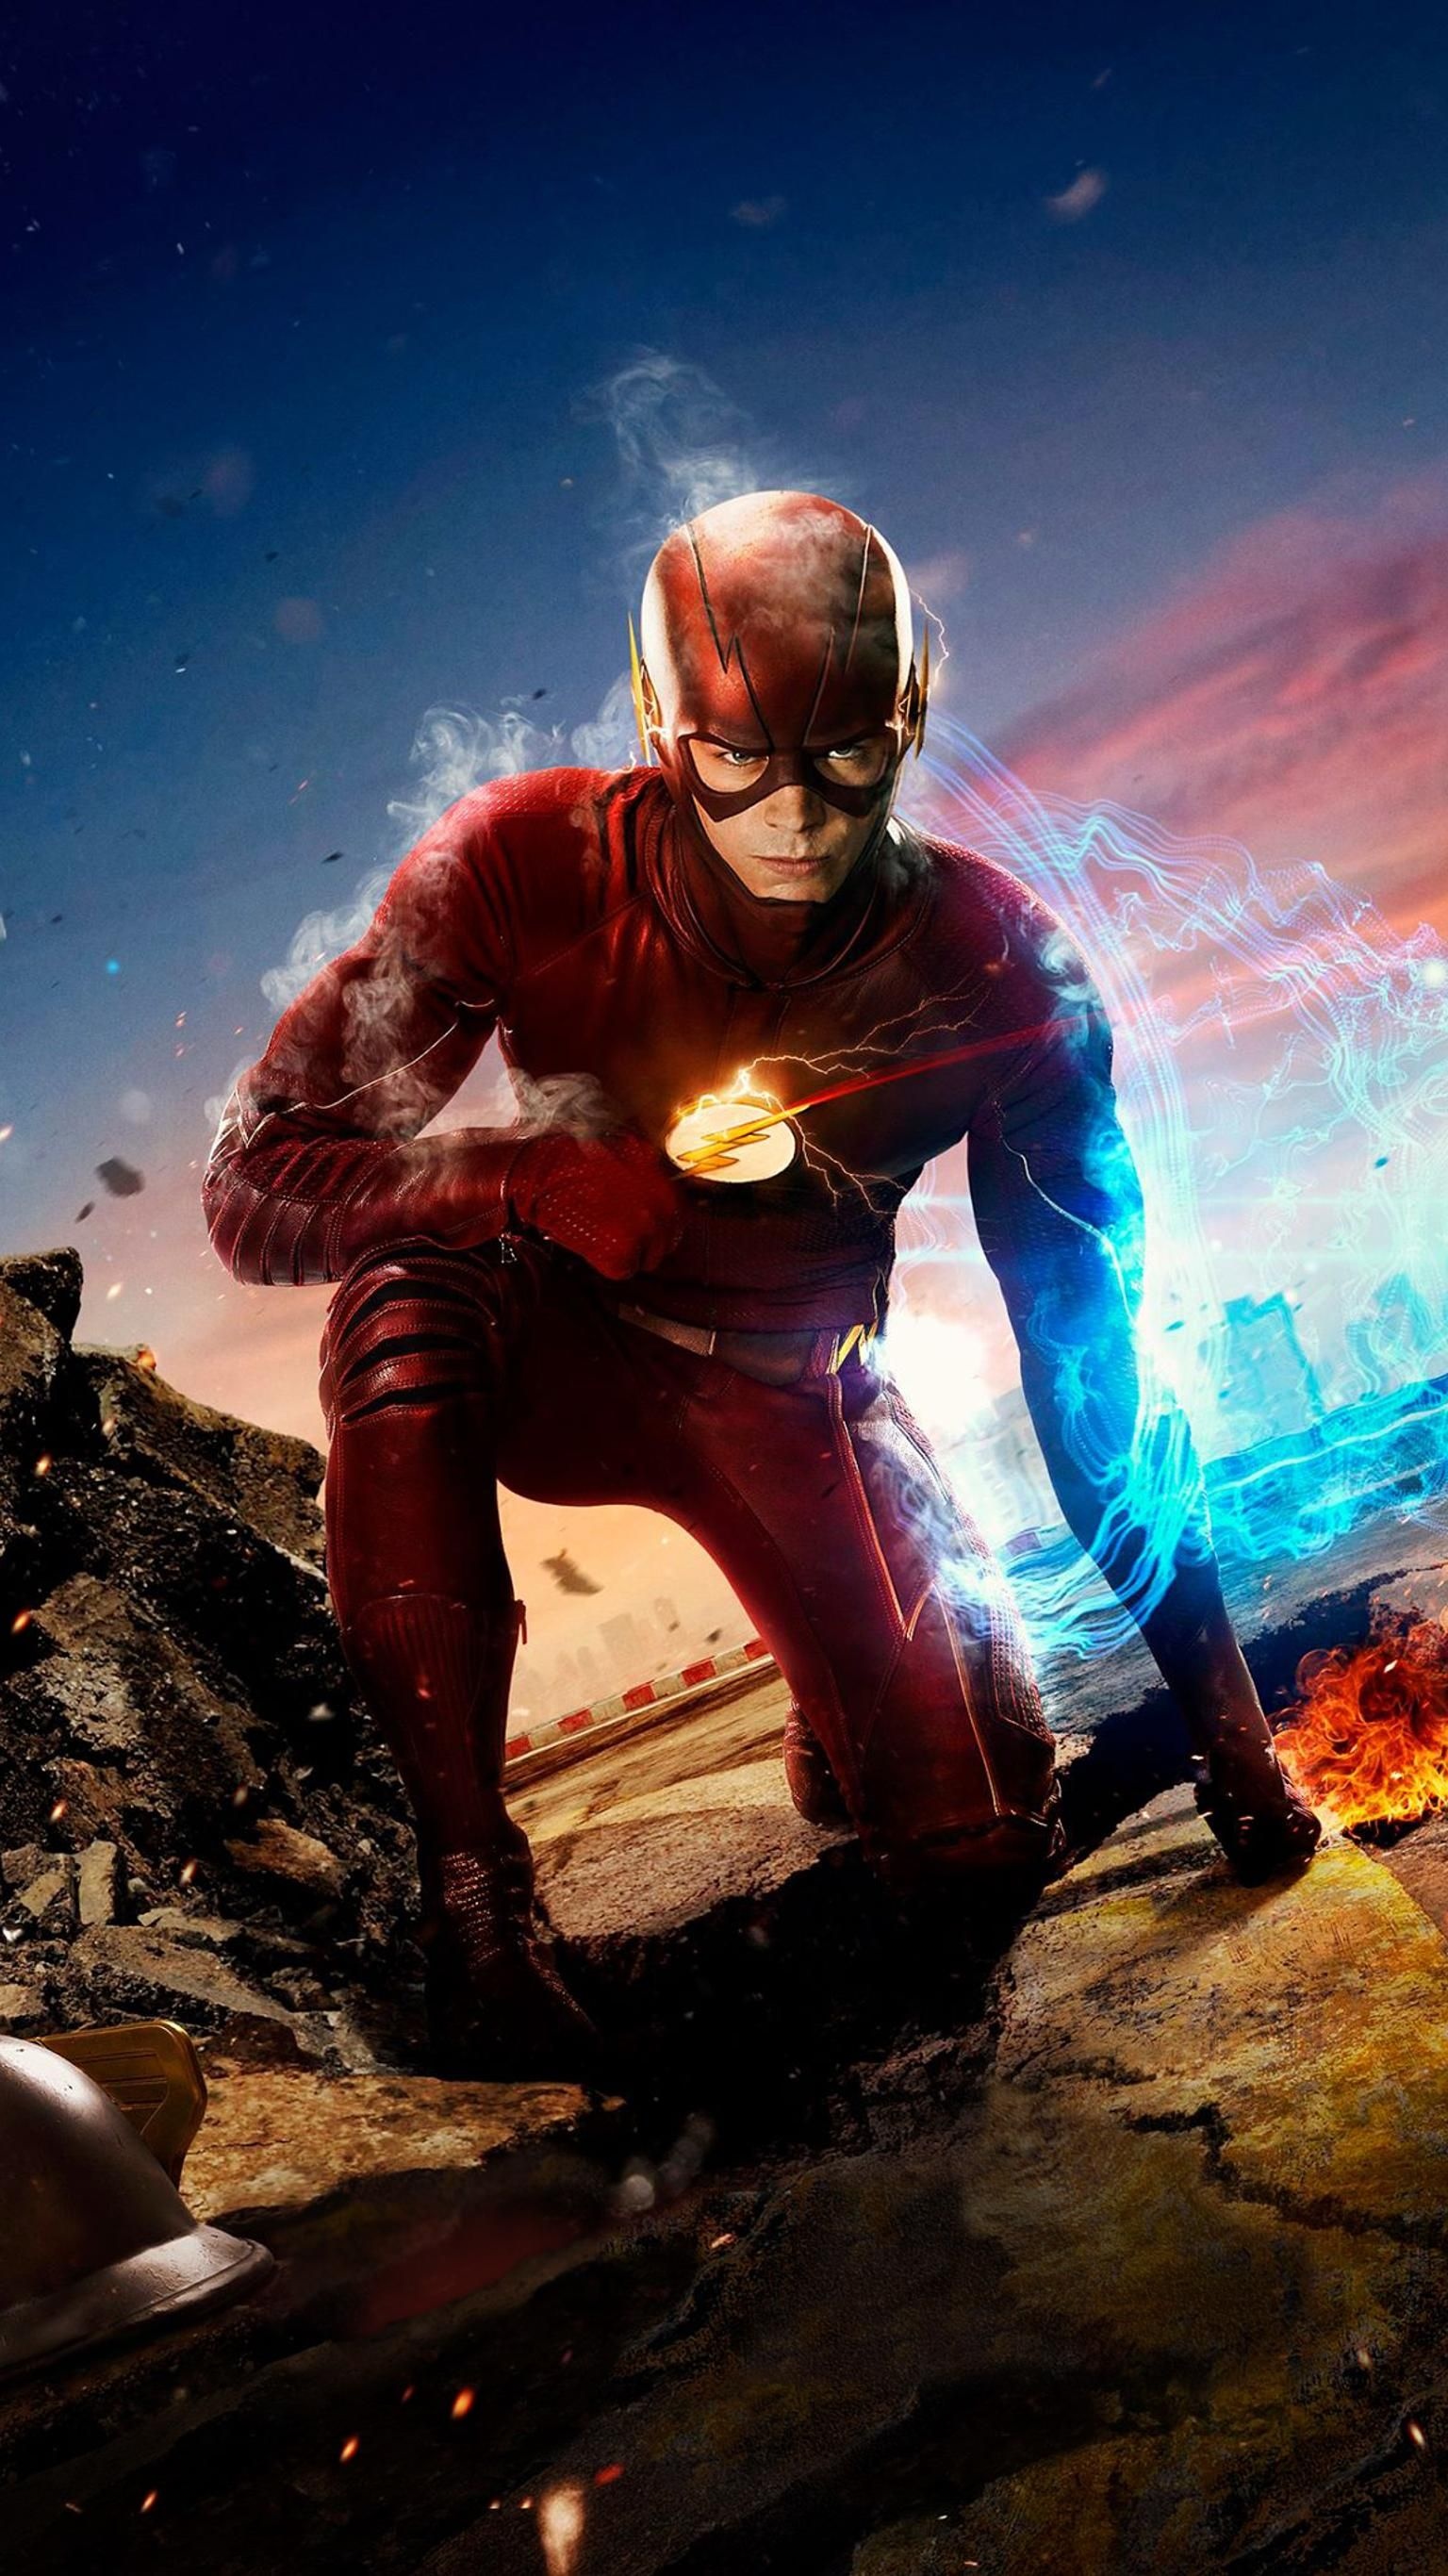 Grant Gustin: The Flash, A superhero television series developed by Greg Berlanti, Andrew Kreisberg, and Geoff Johns. 1540x2740 HD Background.